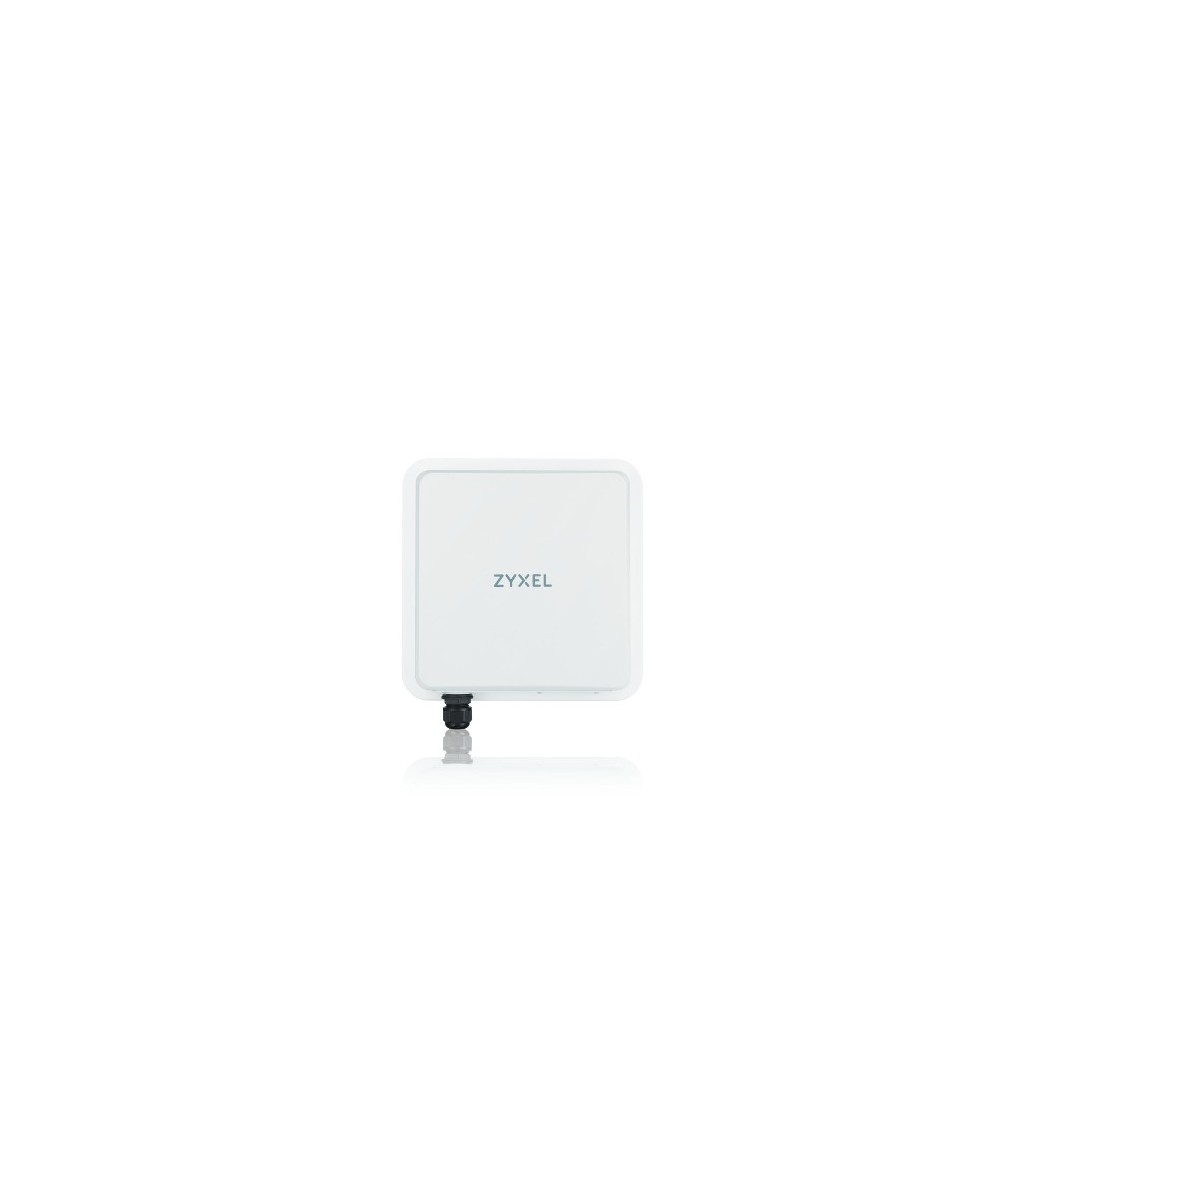 ZyXEL ROUTEUR IP68 LTE 5G PORT LAN 2.5GBPS - Router - 2.5 Gbps